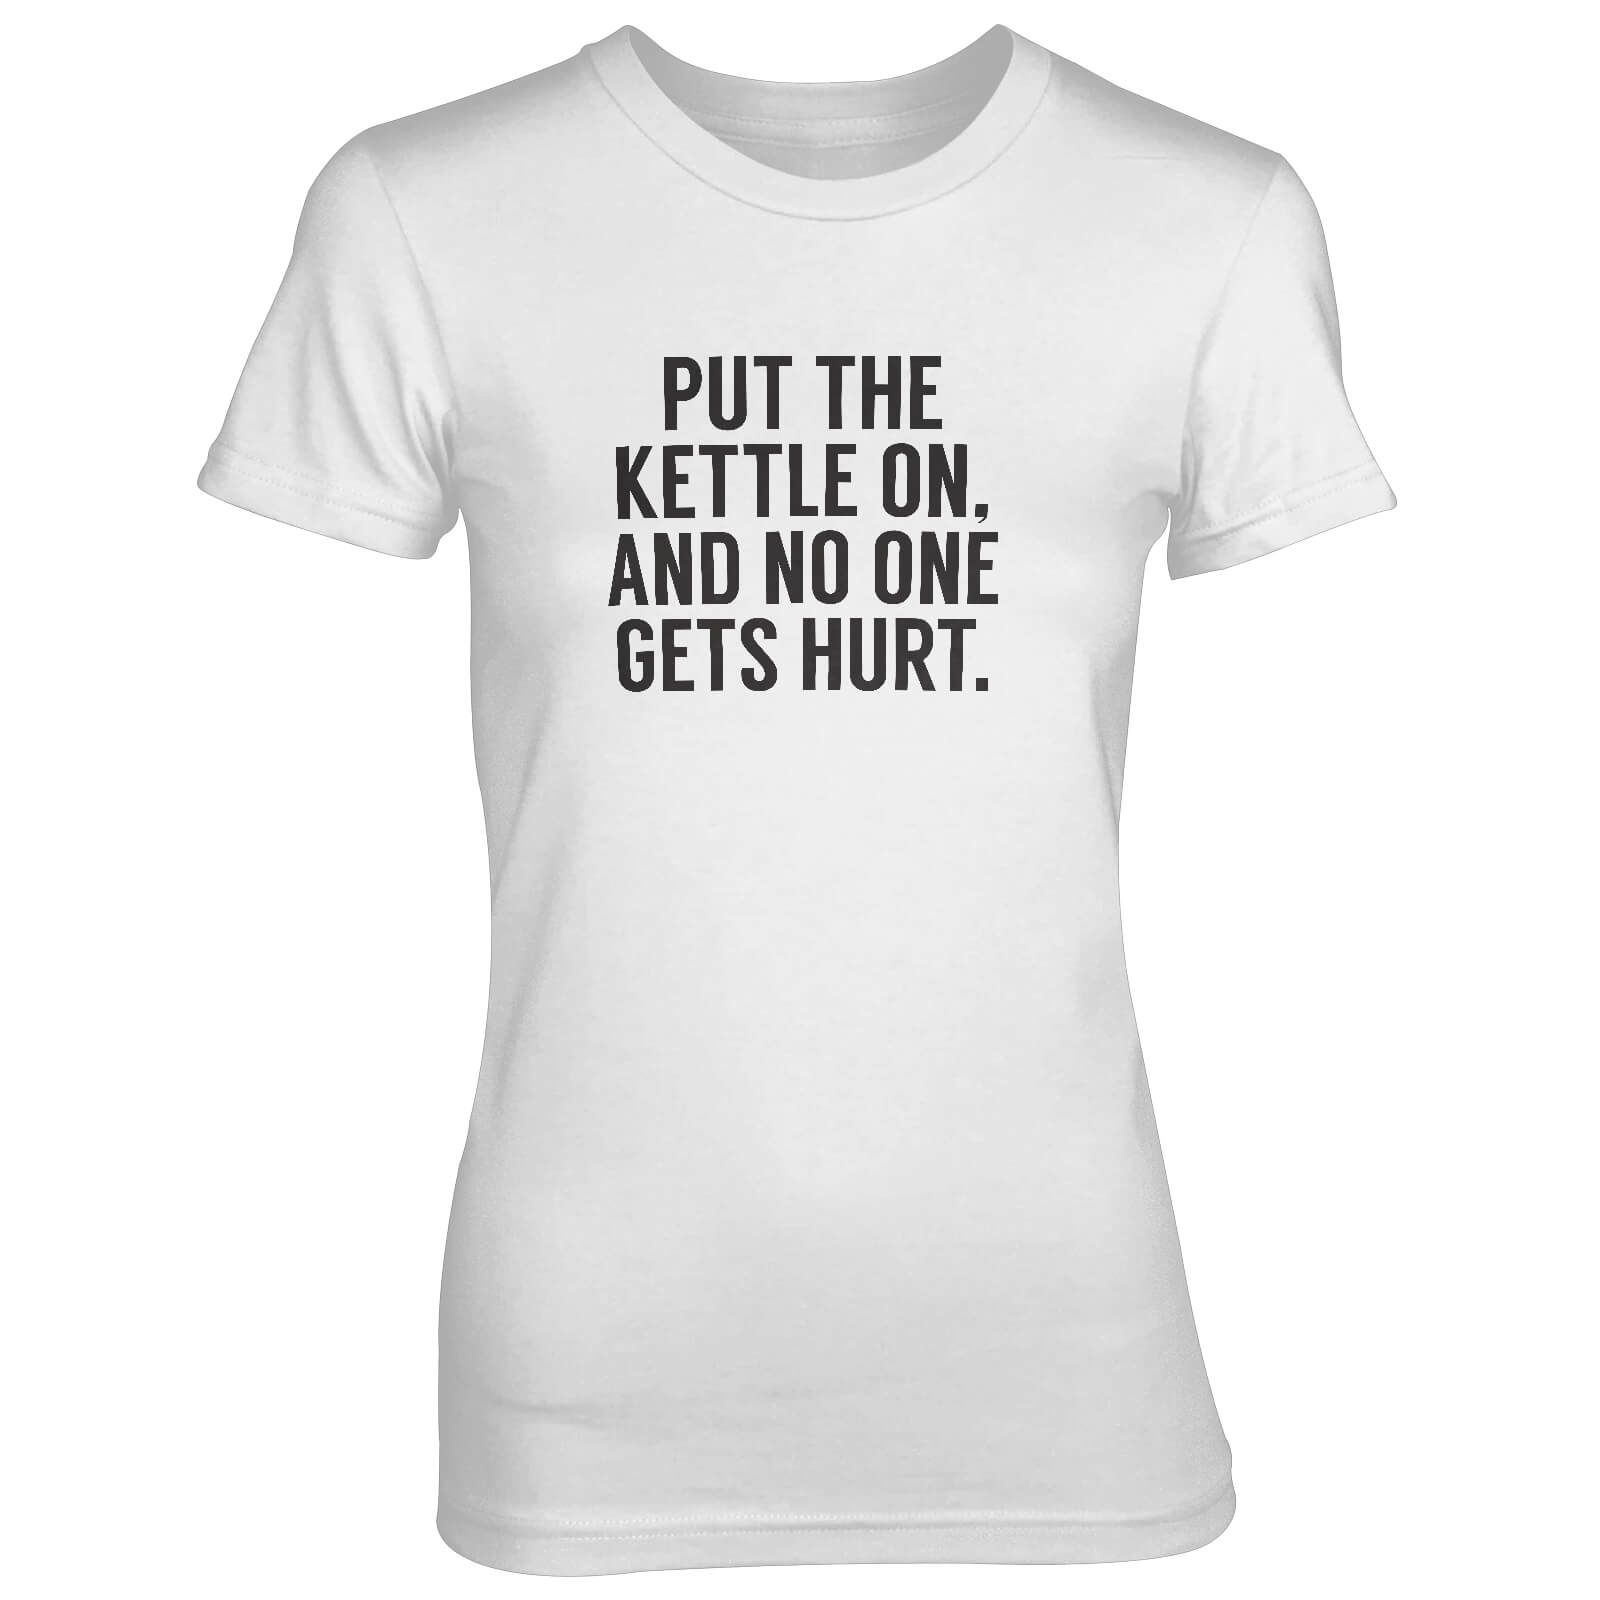 Put The Kettle On And No One Gets Hurt Women's White T-Shirt - S - White